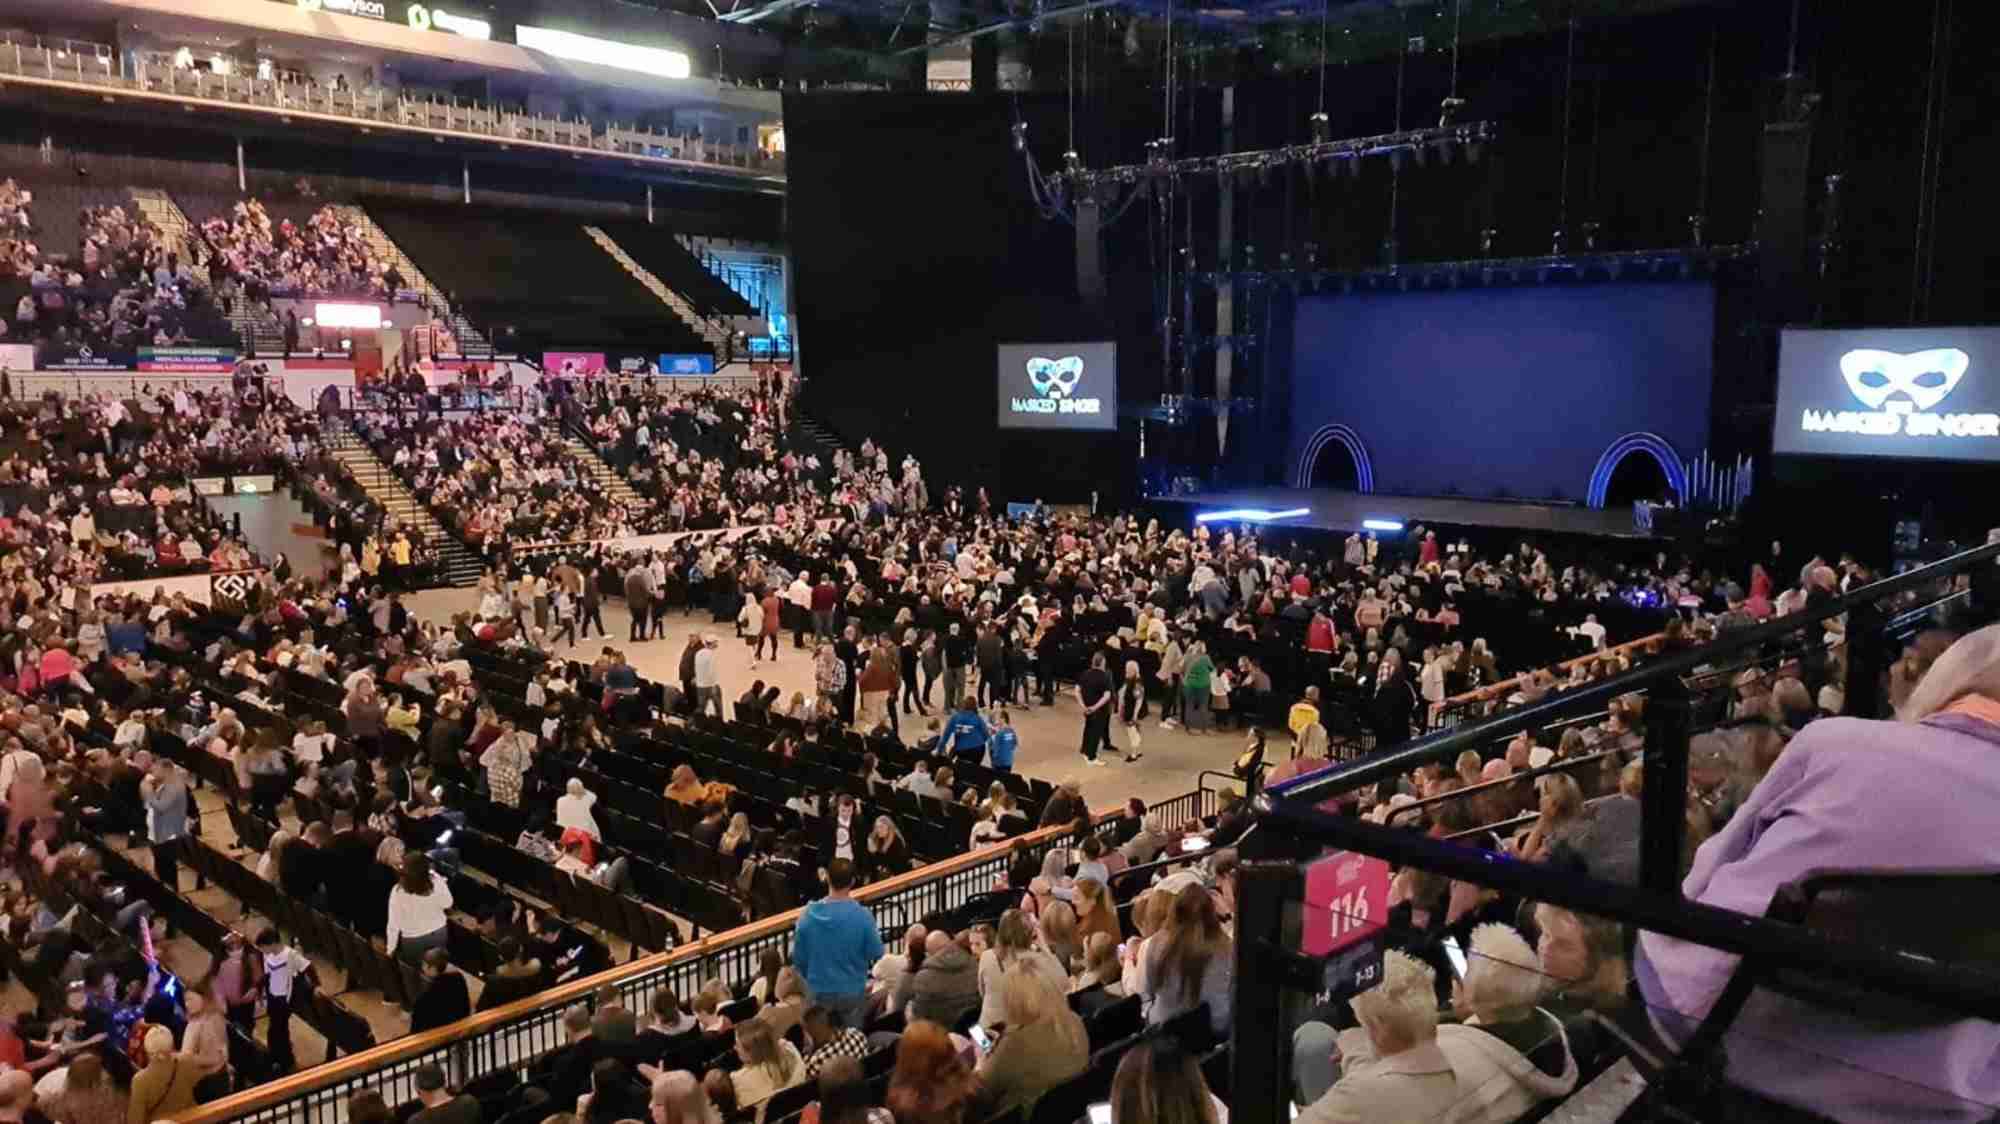 View of The Masked Singer at Utilita Arena Sheffield from Seat Block 115